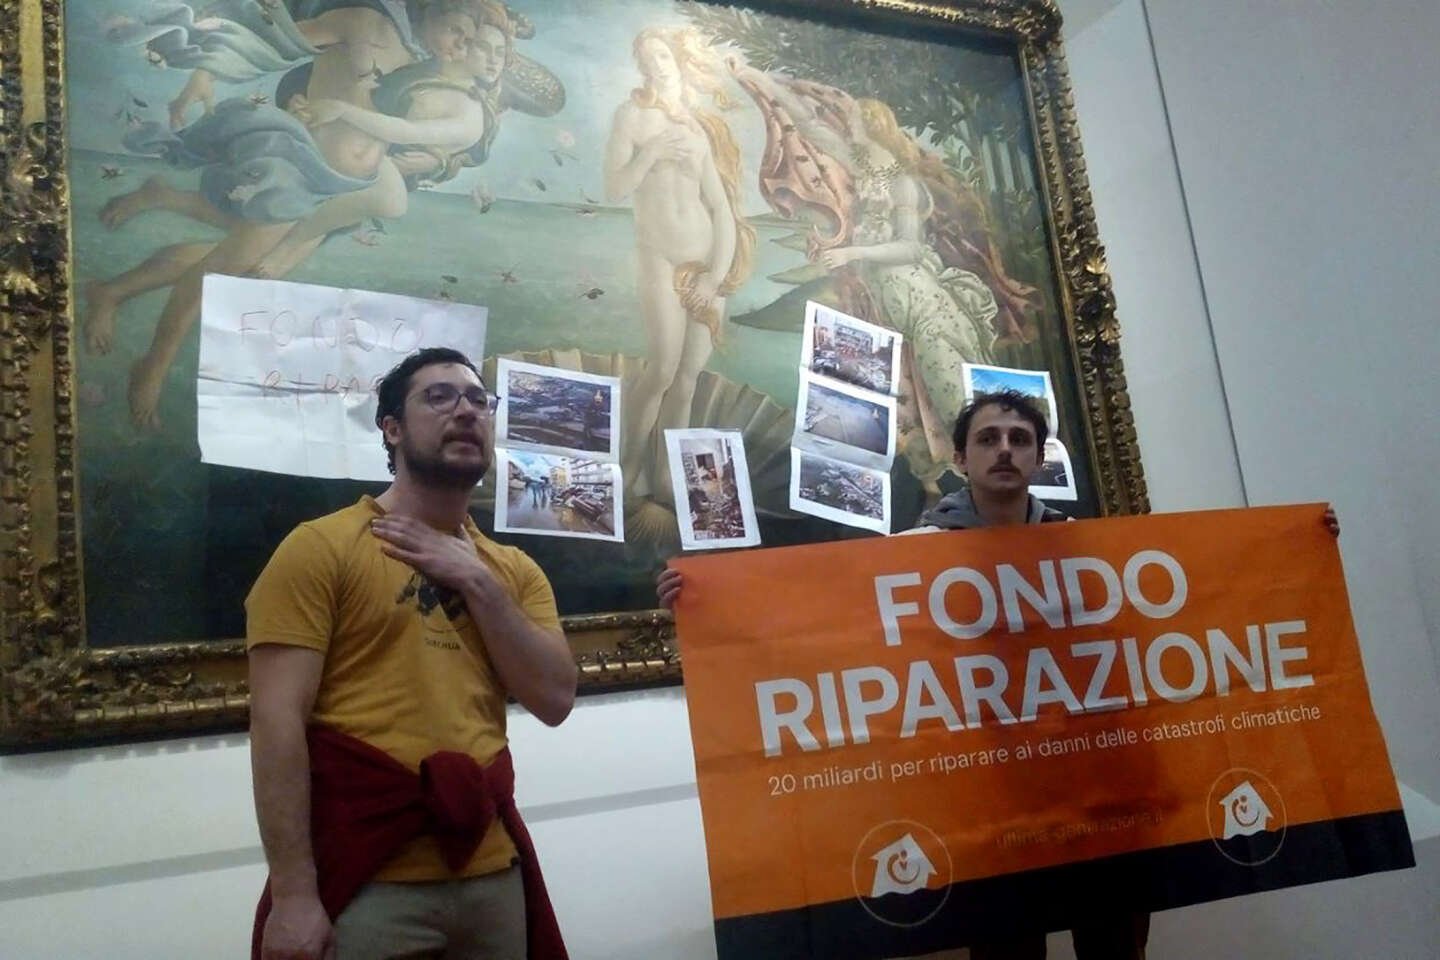 Botticelli painting in Florence targeted by climate activists